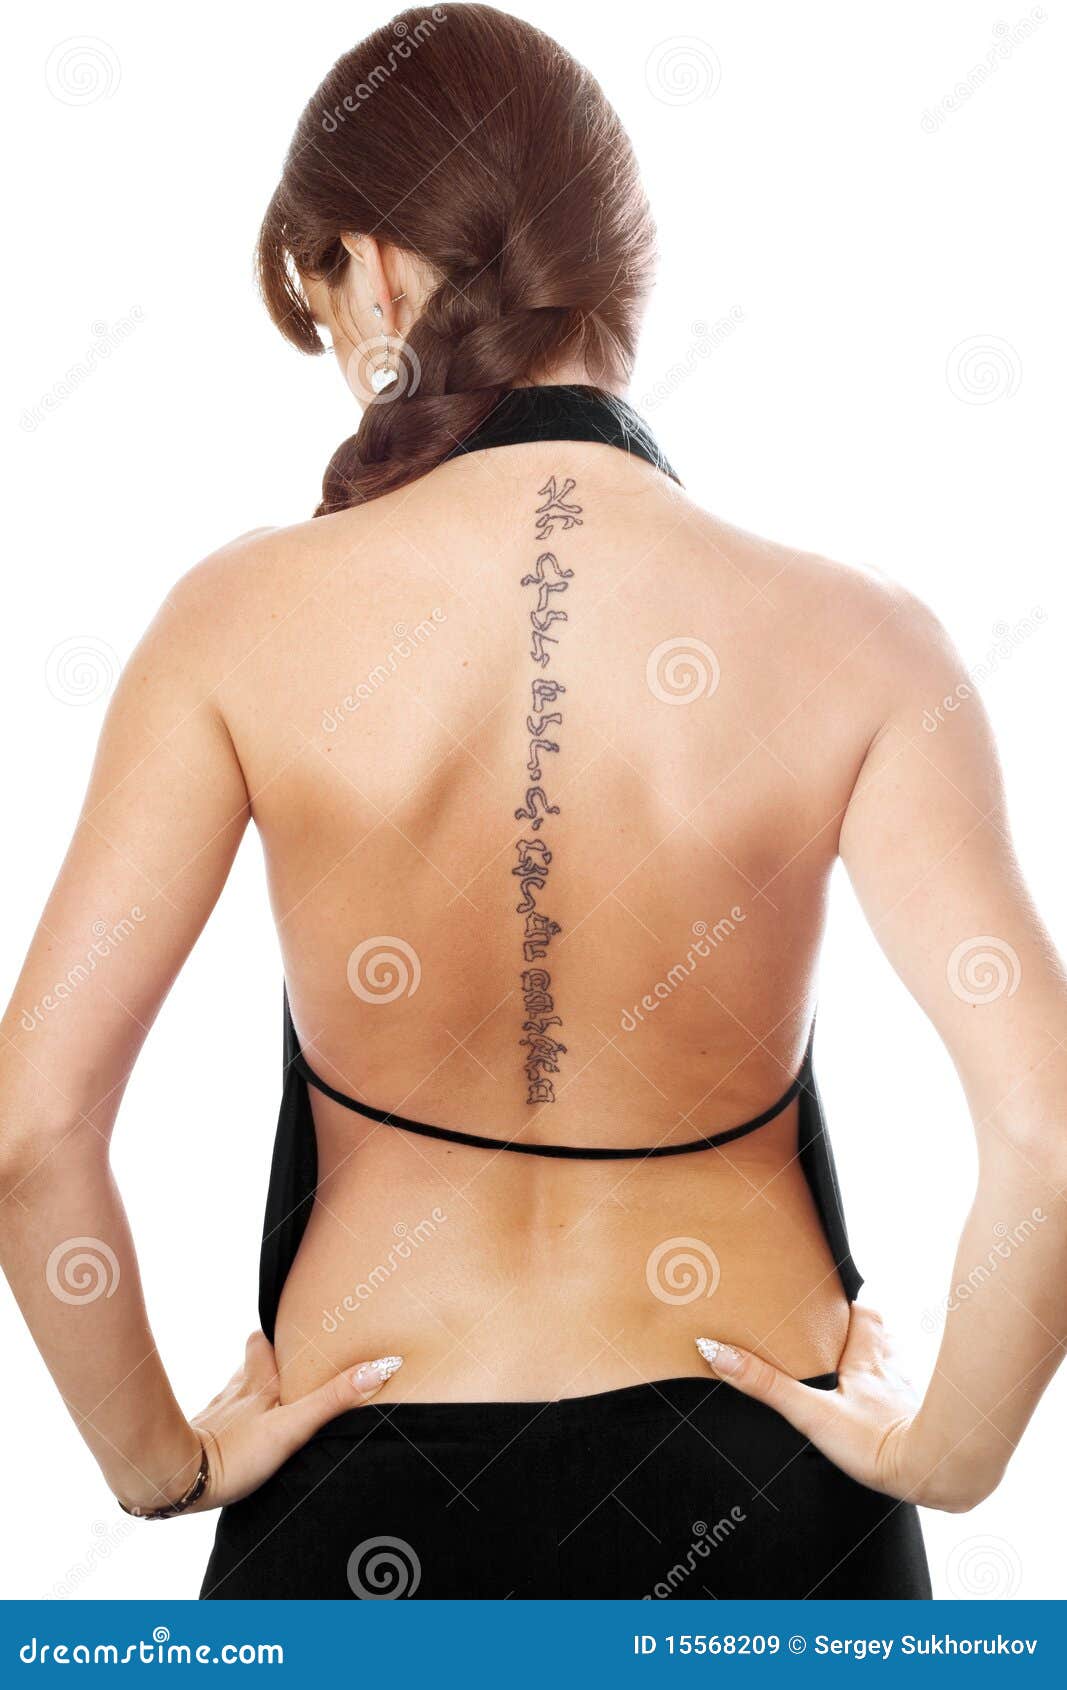 40+ Back Tattoos For Women That Will Make You Want One